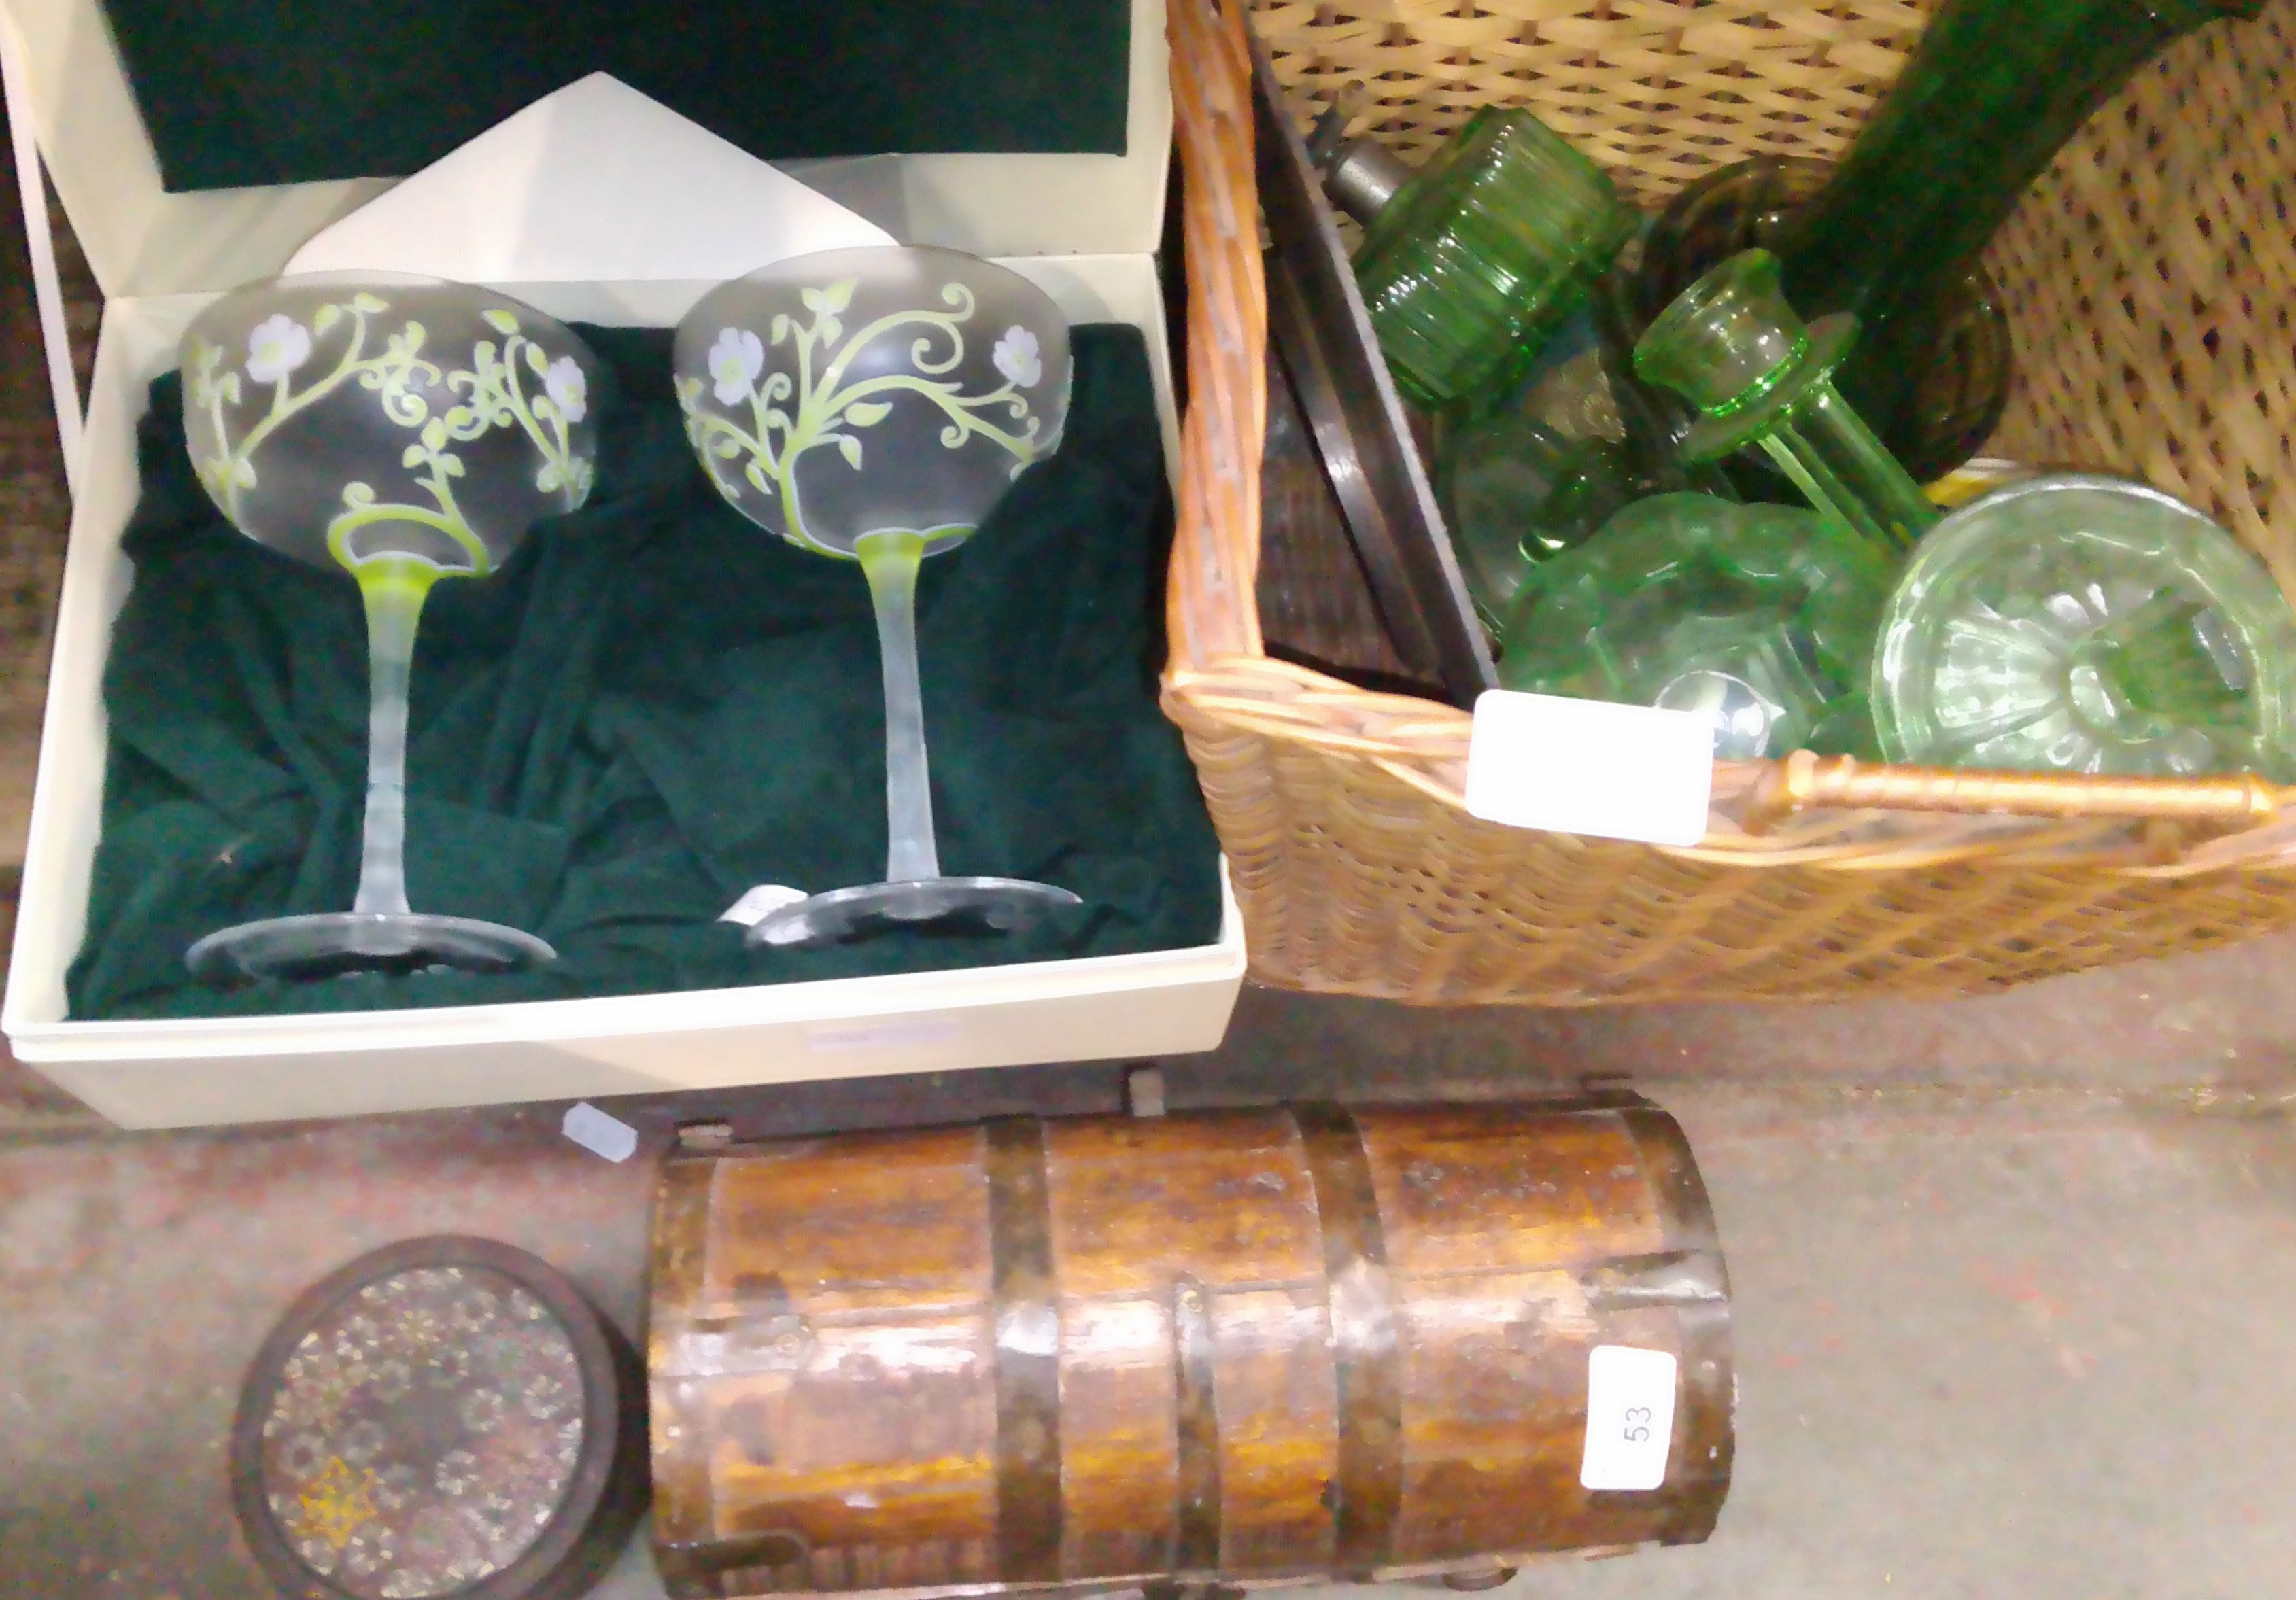 A mixed lot comprising an eastern casket, a wicker basket with green glass and a pair of Perrier